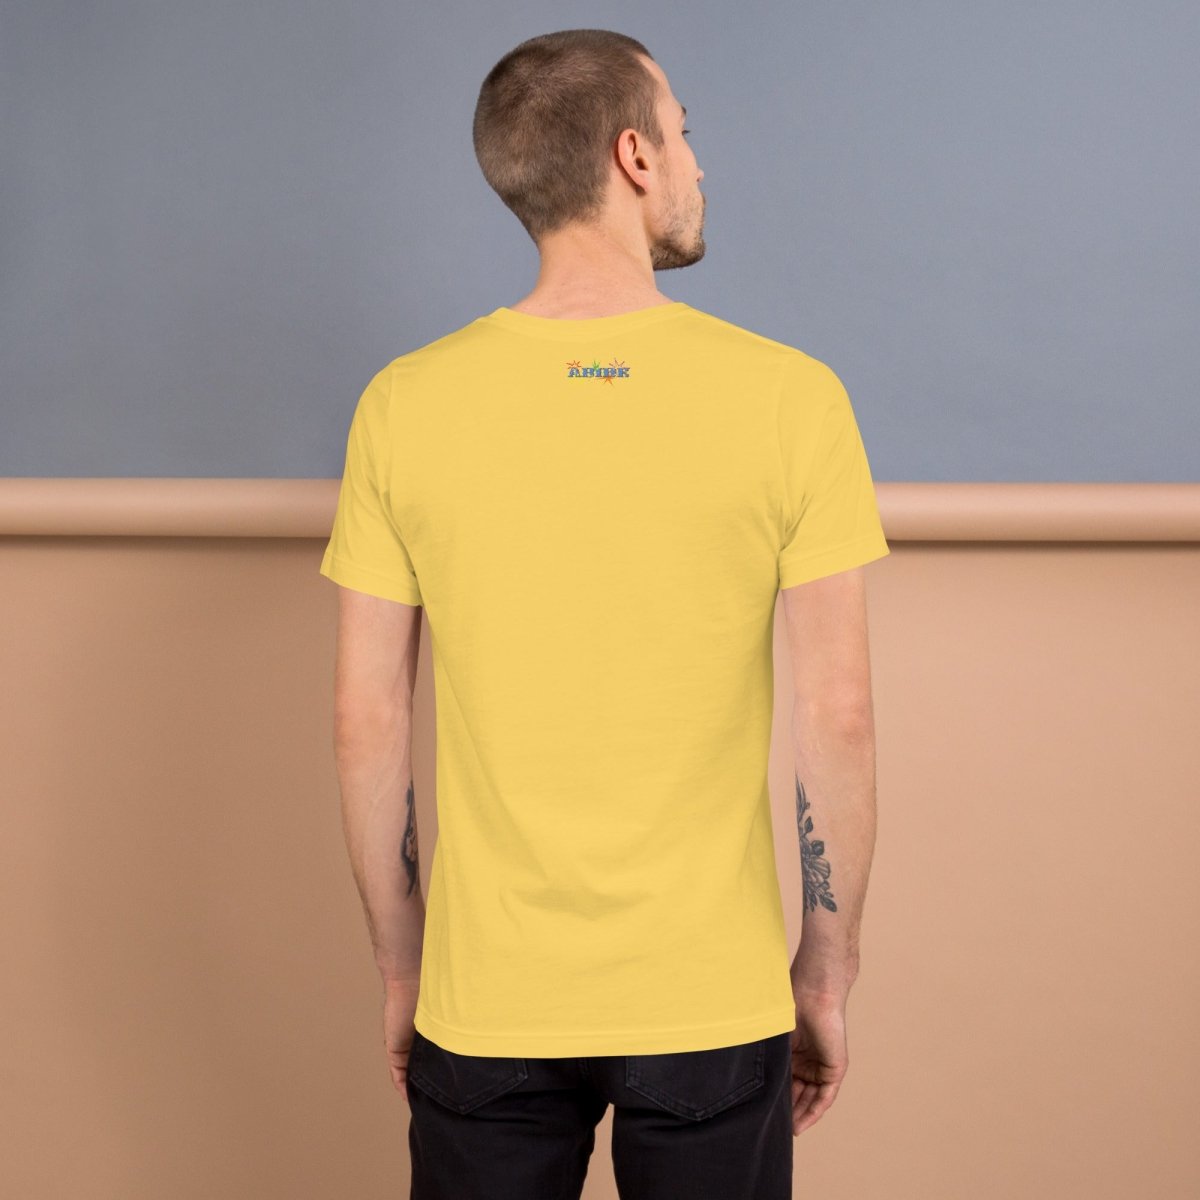 Dad Noises- Dadisms - Don't Make Me Pull This Car Over Yellow Unisex t-shirt back view - The Dude Abides - Birthday